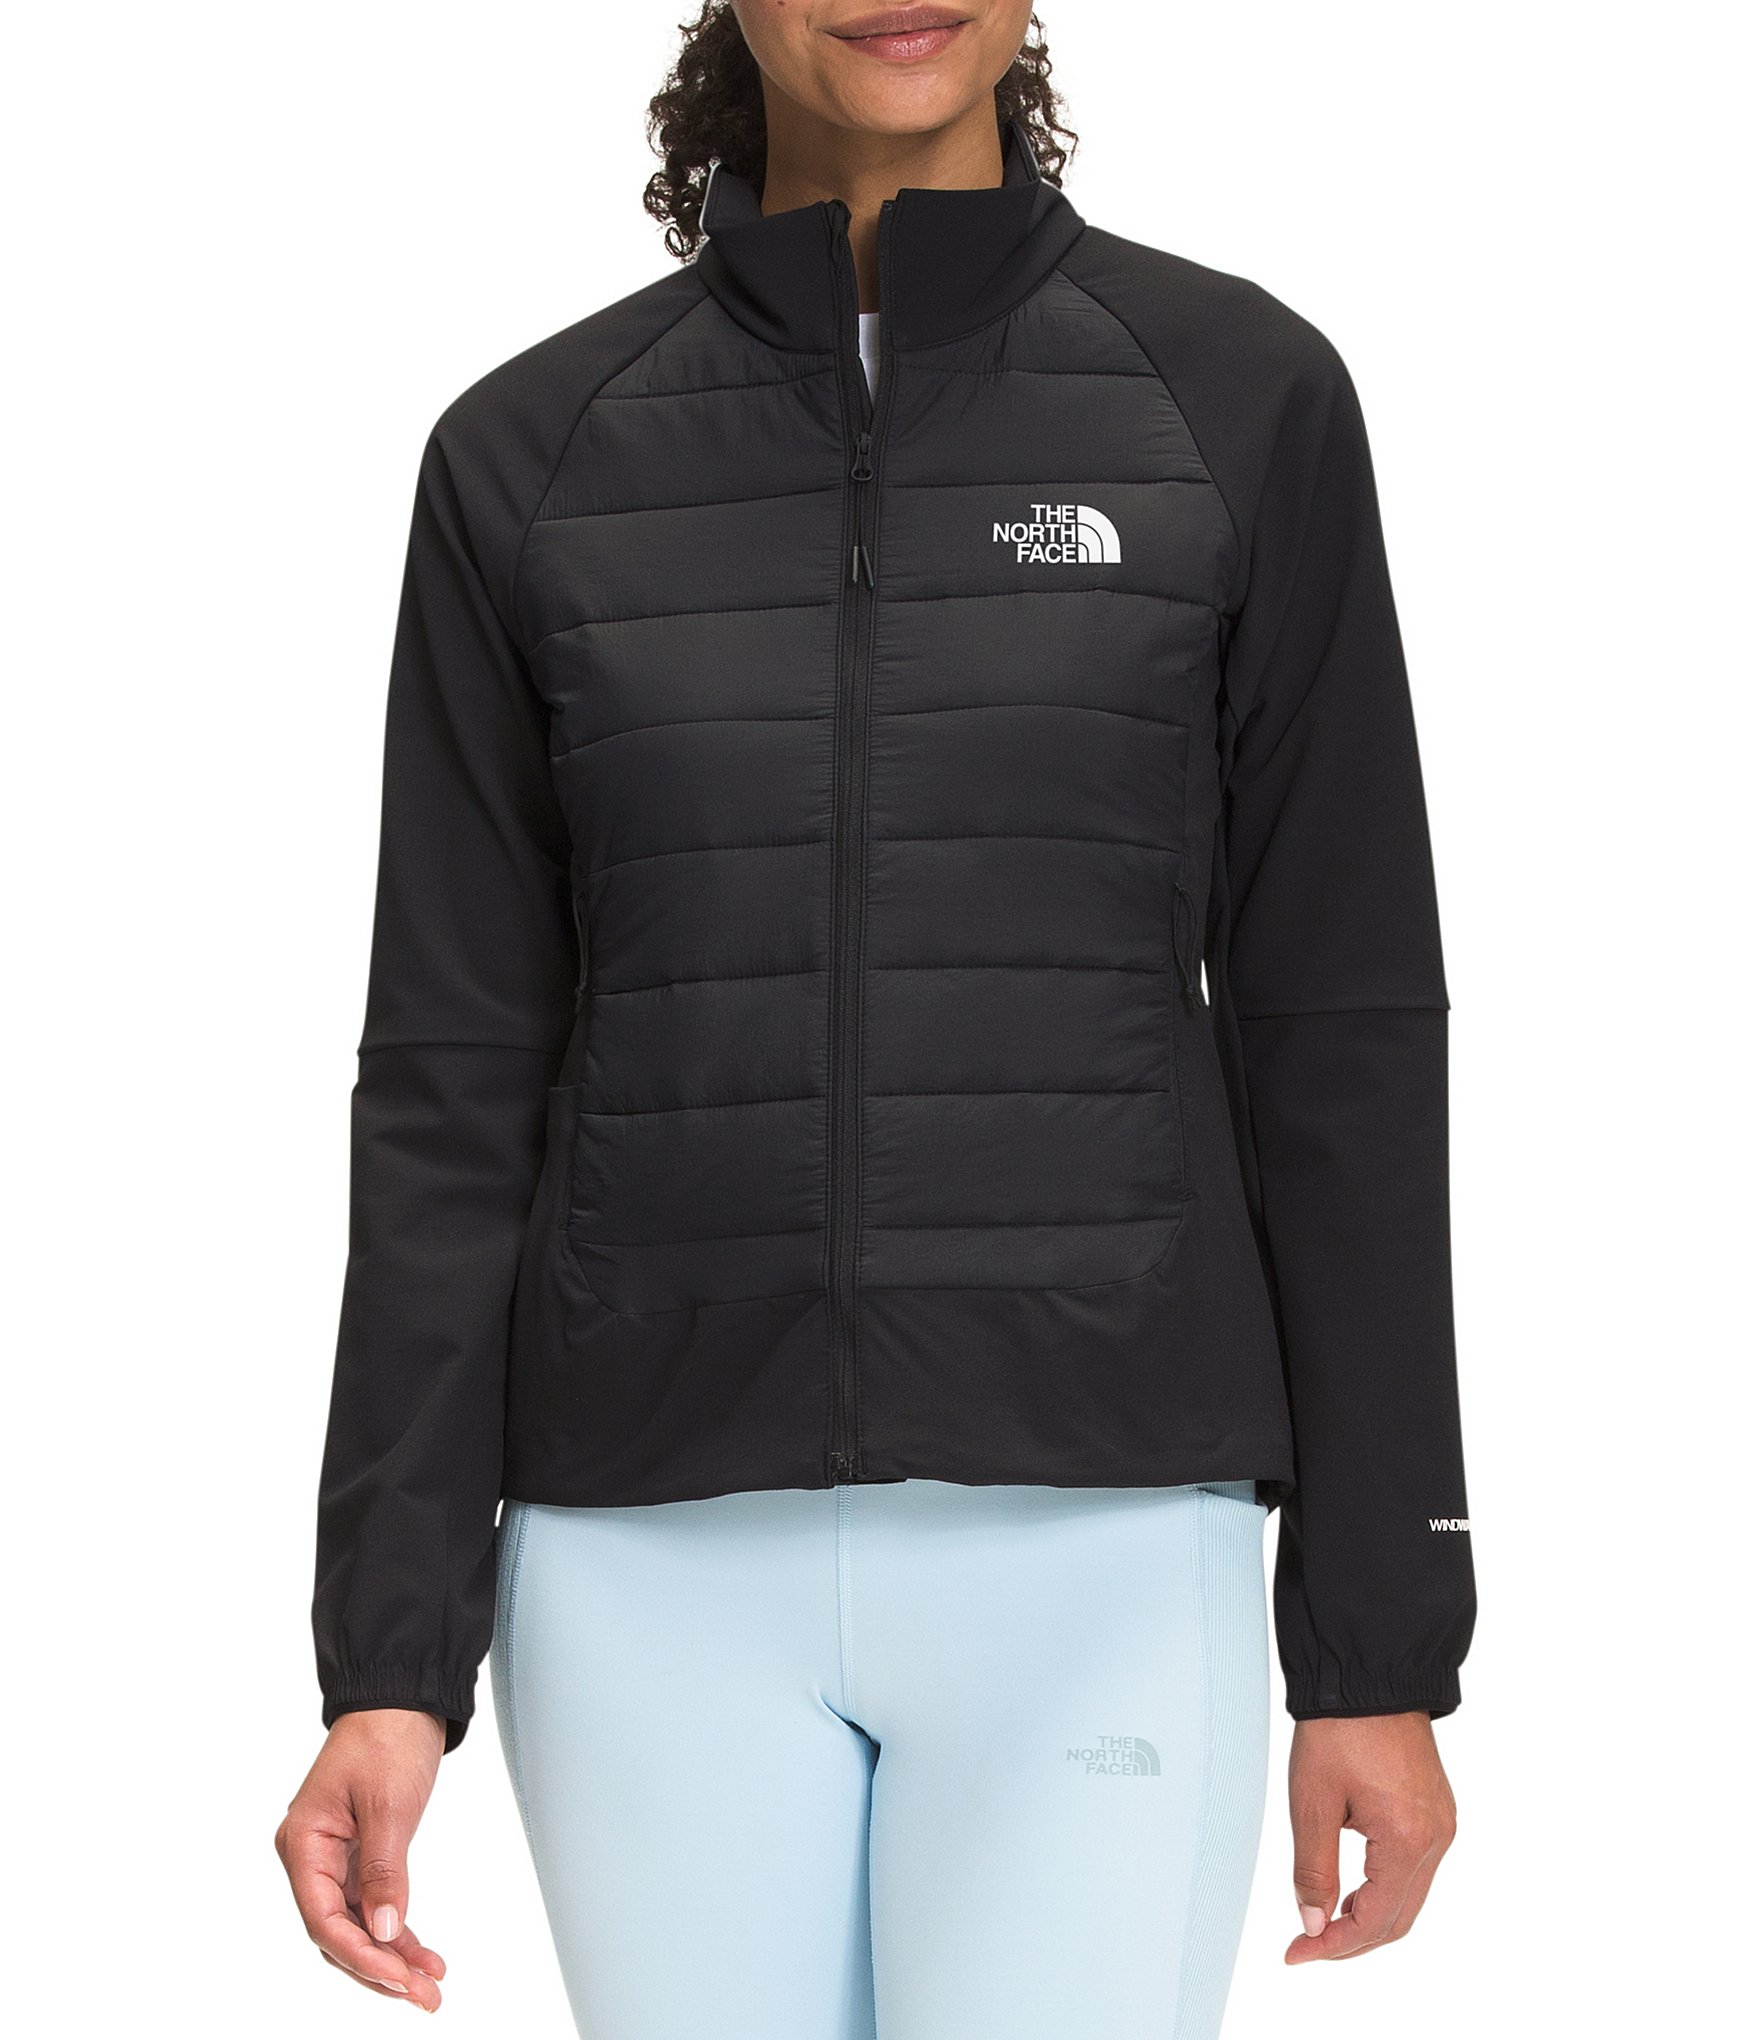 The North Face Osito Long Sleeve Breast Cancer Awareness Raschel